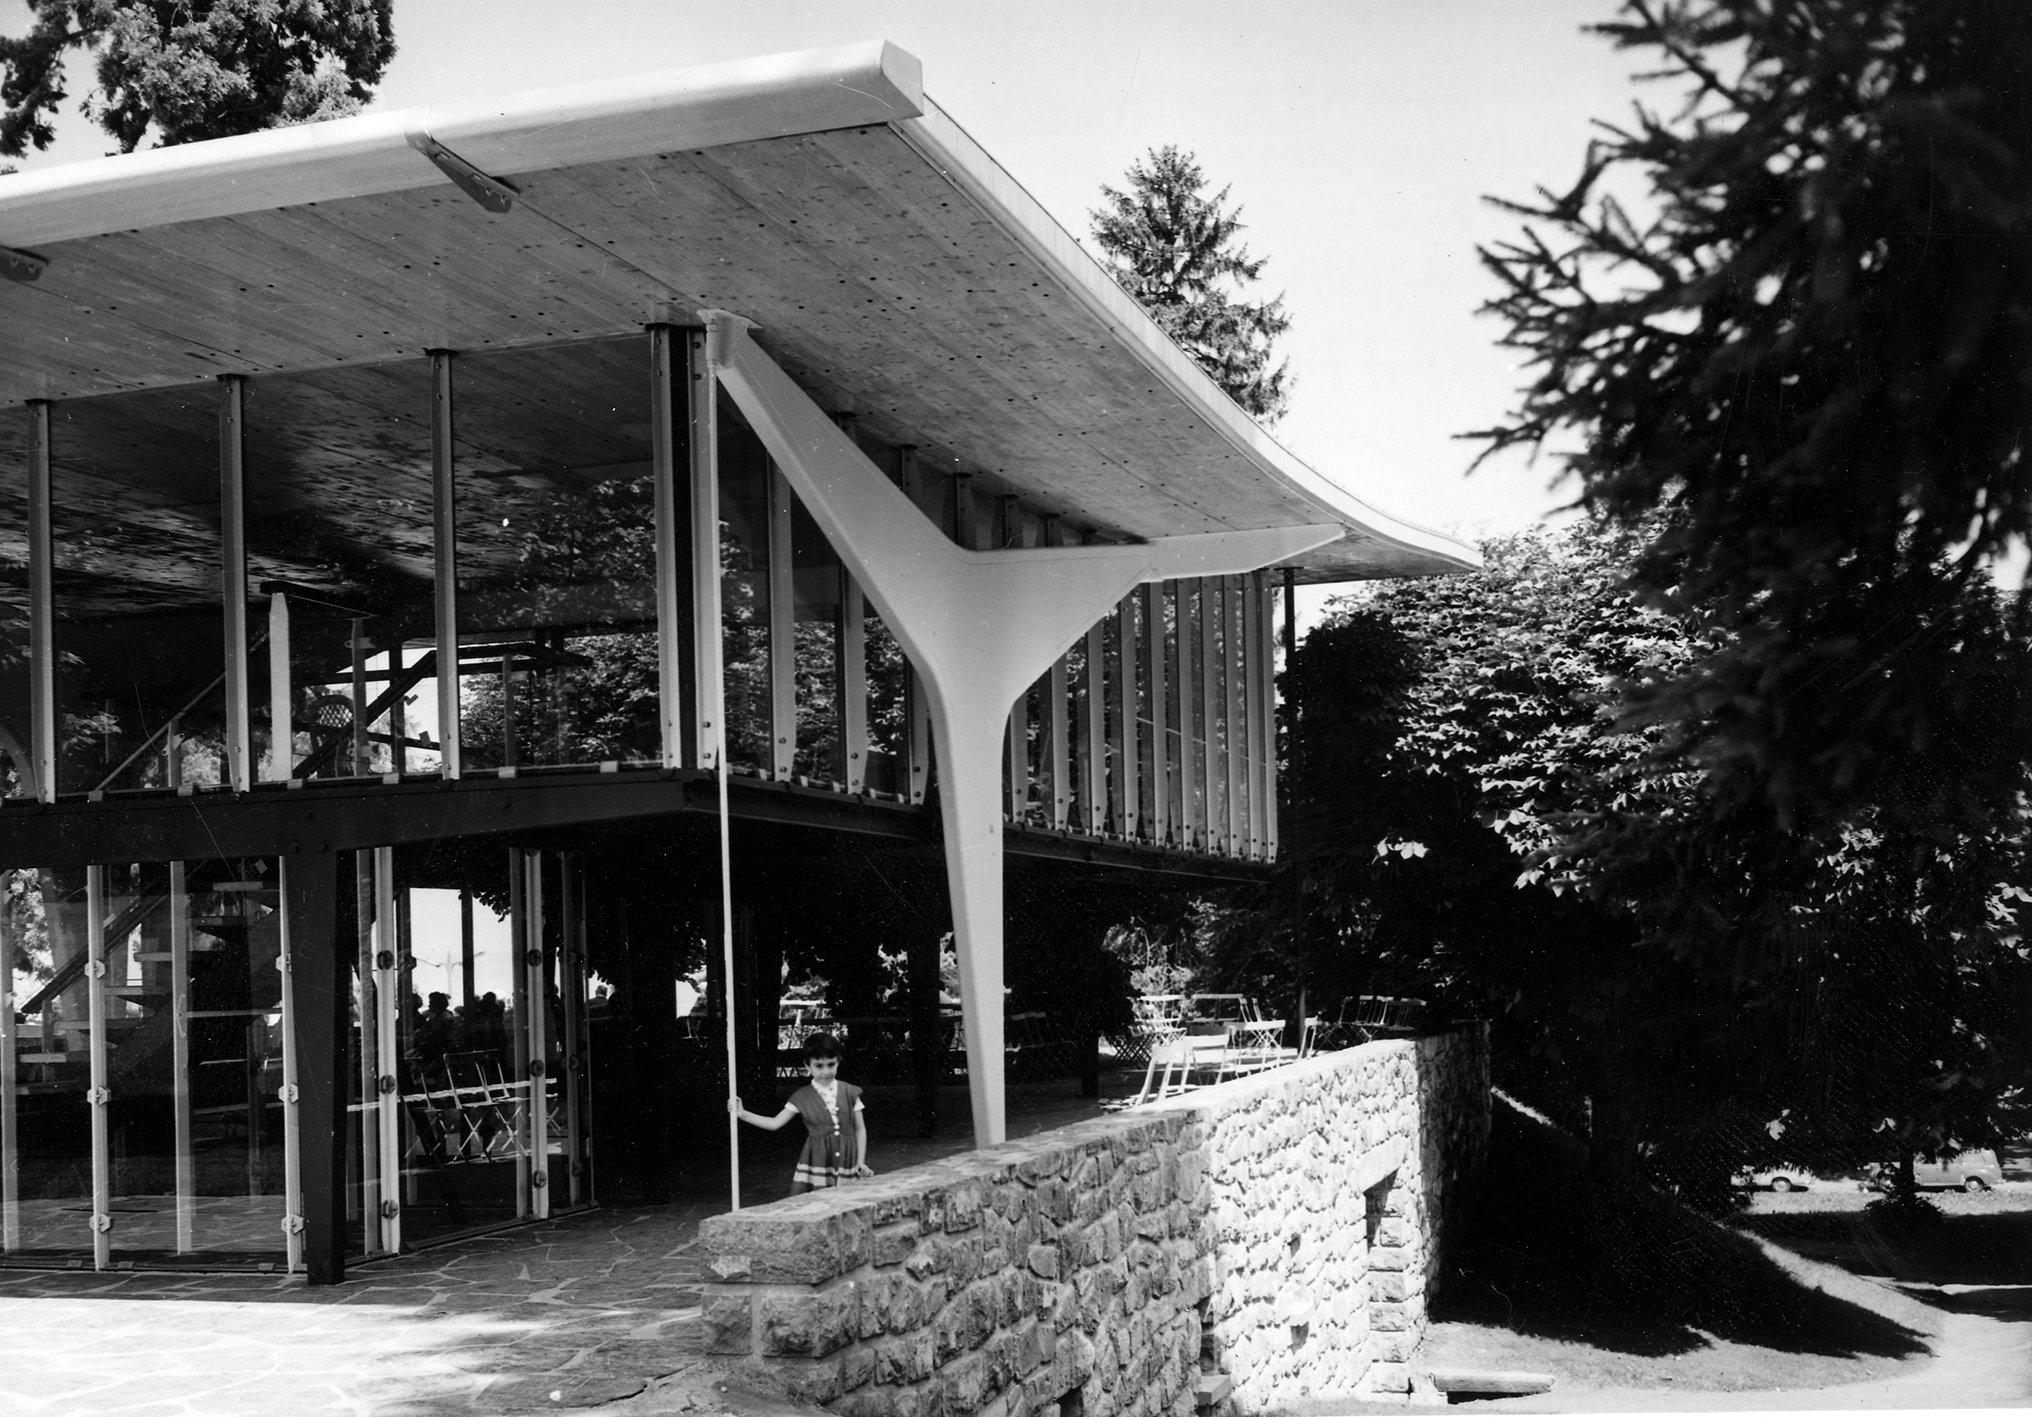 Cachat mineral water pump room, Évian, 1956 (Jean Prouvé, with architect M. Novarina, engineer S. Ketoff). View of the assembled loadbearing structure.